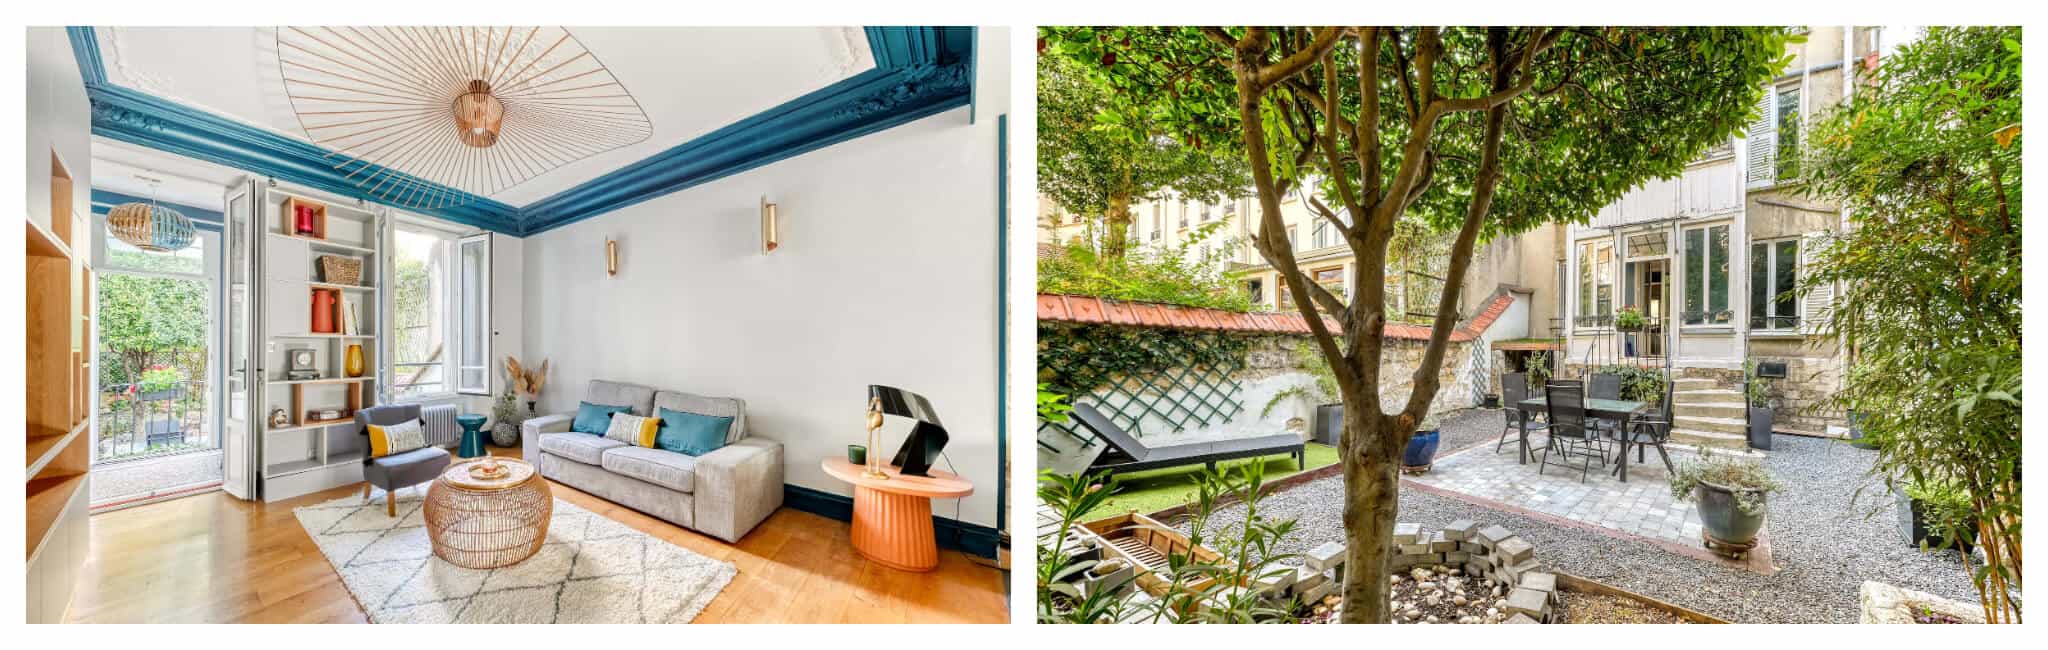 Left: A cozy living room with a white rug, wooden flooring, gray couch and white bookshelves. Right: A backyard garden with a tall tree in the middle and a set of table and chairs behind it.